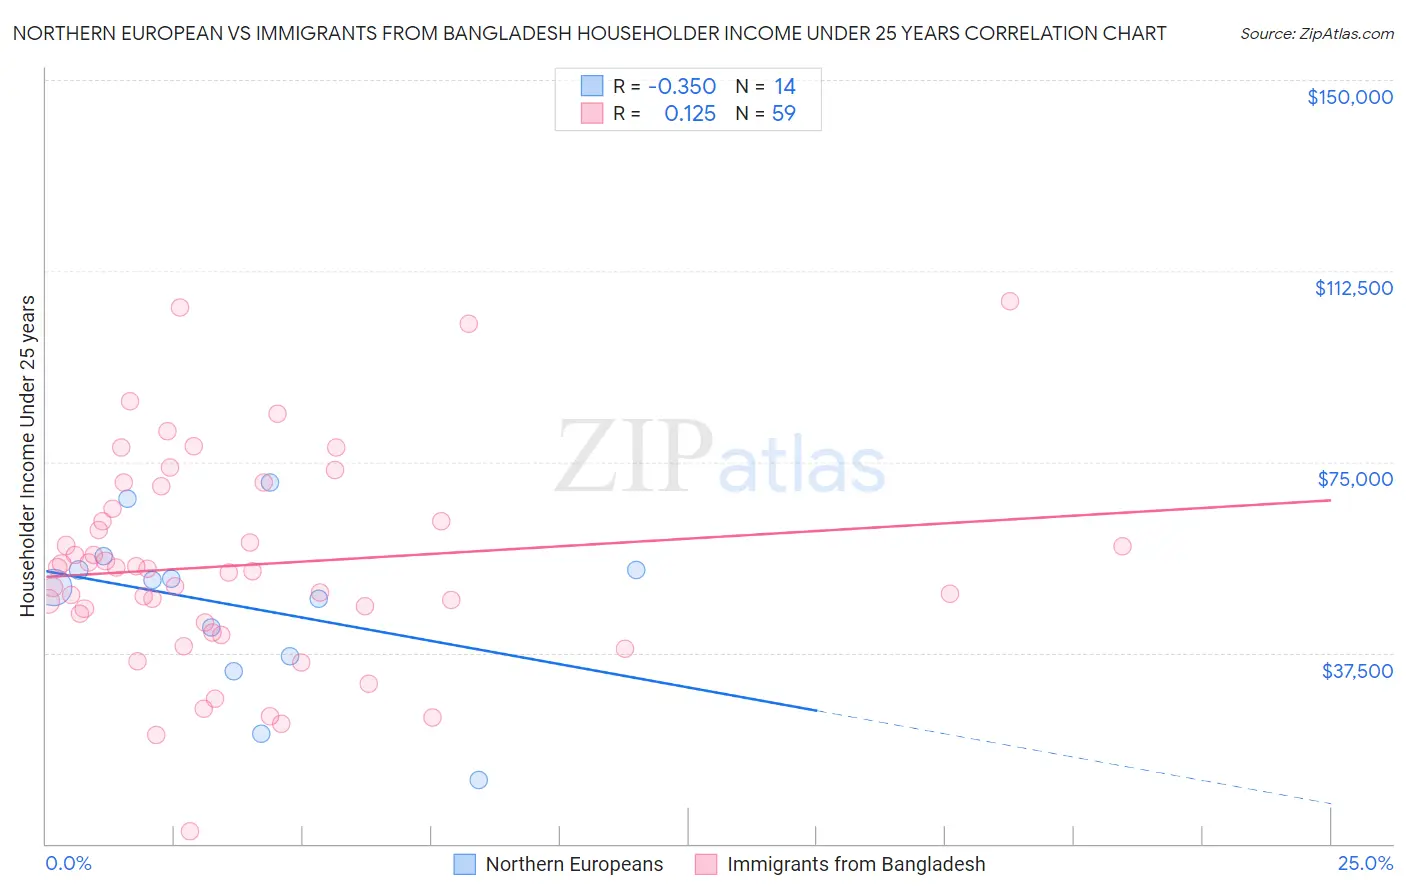 Northern European vs Immigrants from Bangladesh Householder Income Under 25 years